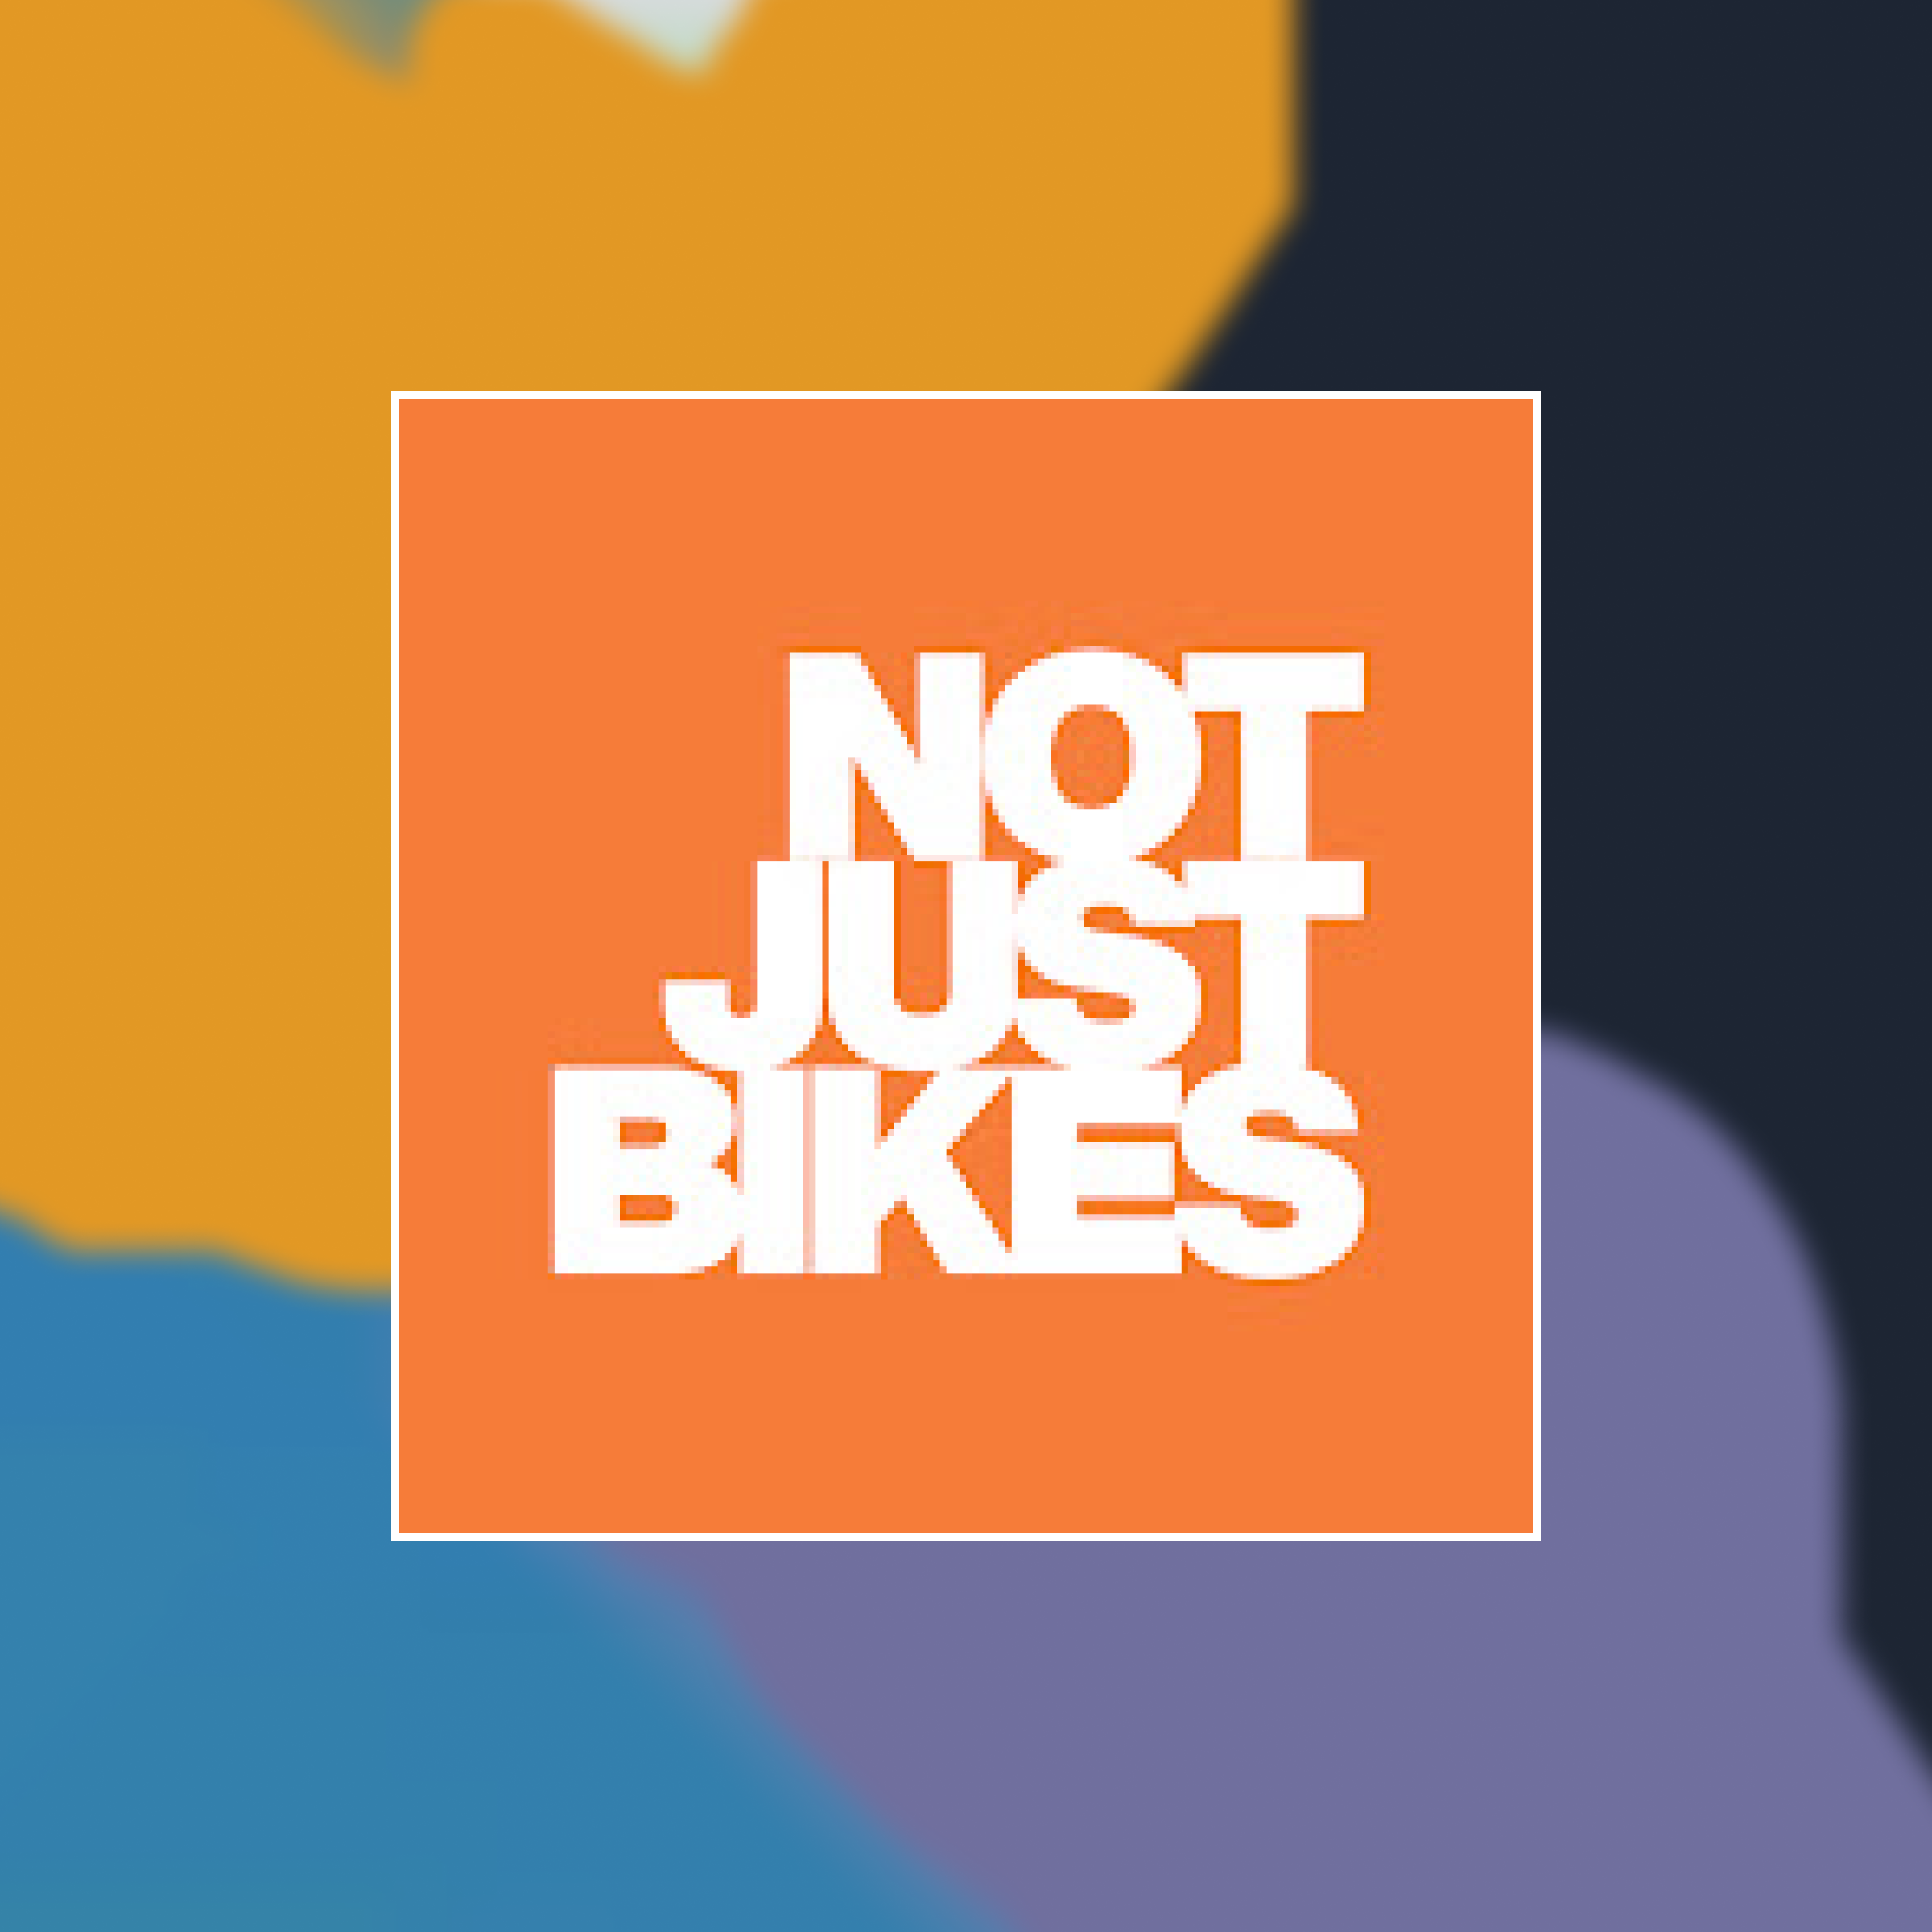 Logo of Not Just Bikes against an abstract painted background